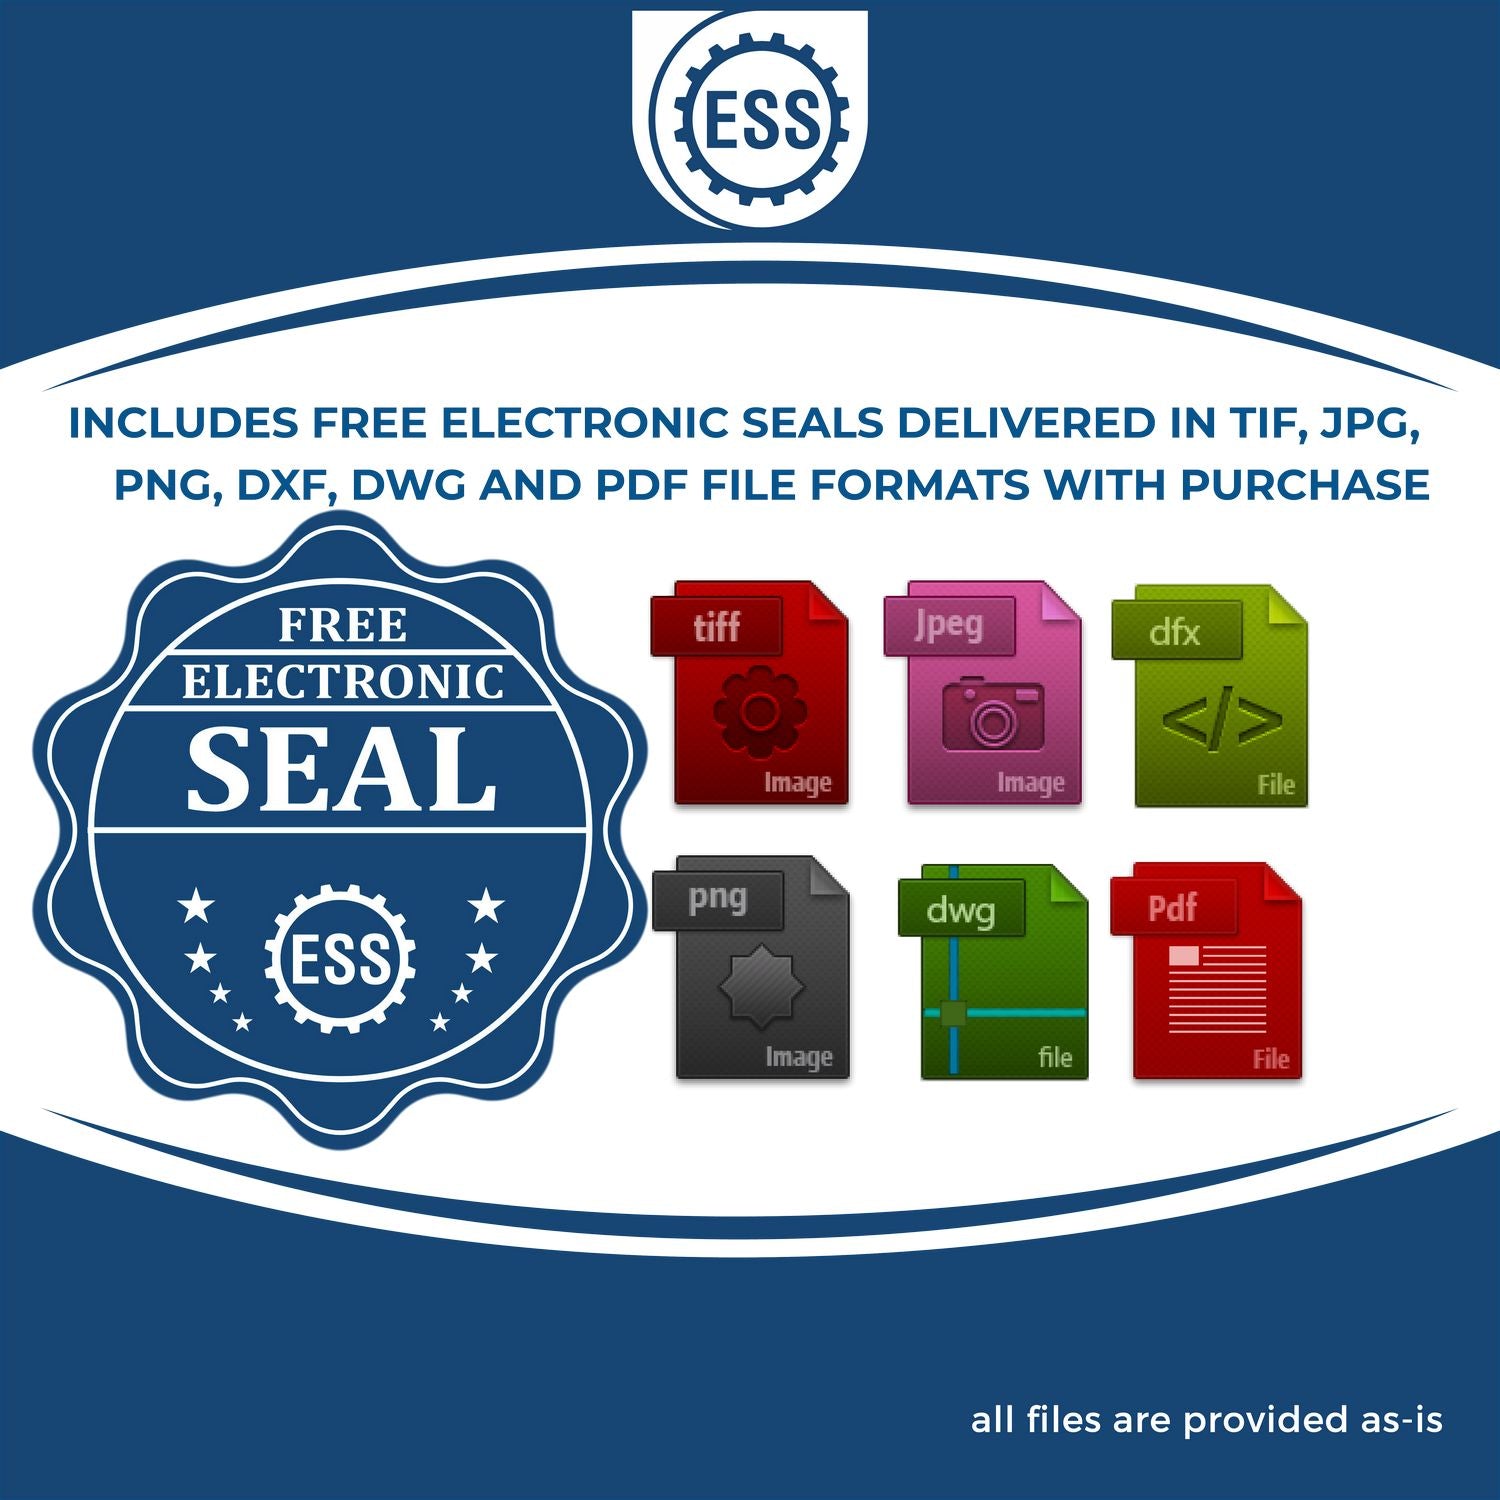 An infographic for the free electronic seal for the Premium MaxLight Pre-Inked Connecticut Engineering Stamp illustrating the different file type icons such as DXF, DWG, TIF, JPG and PNG.